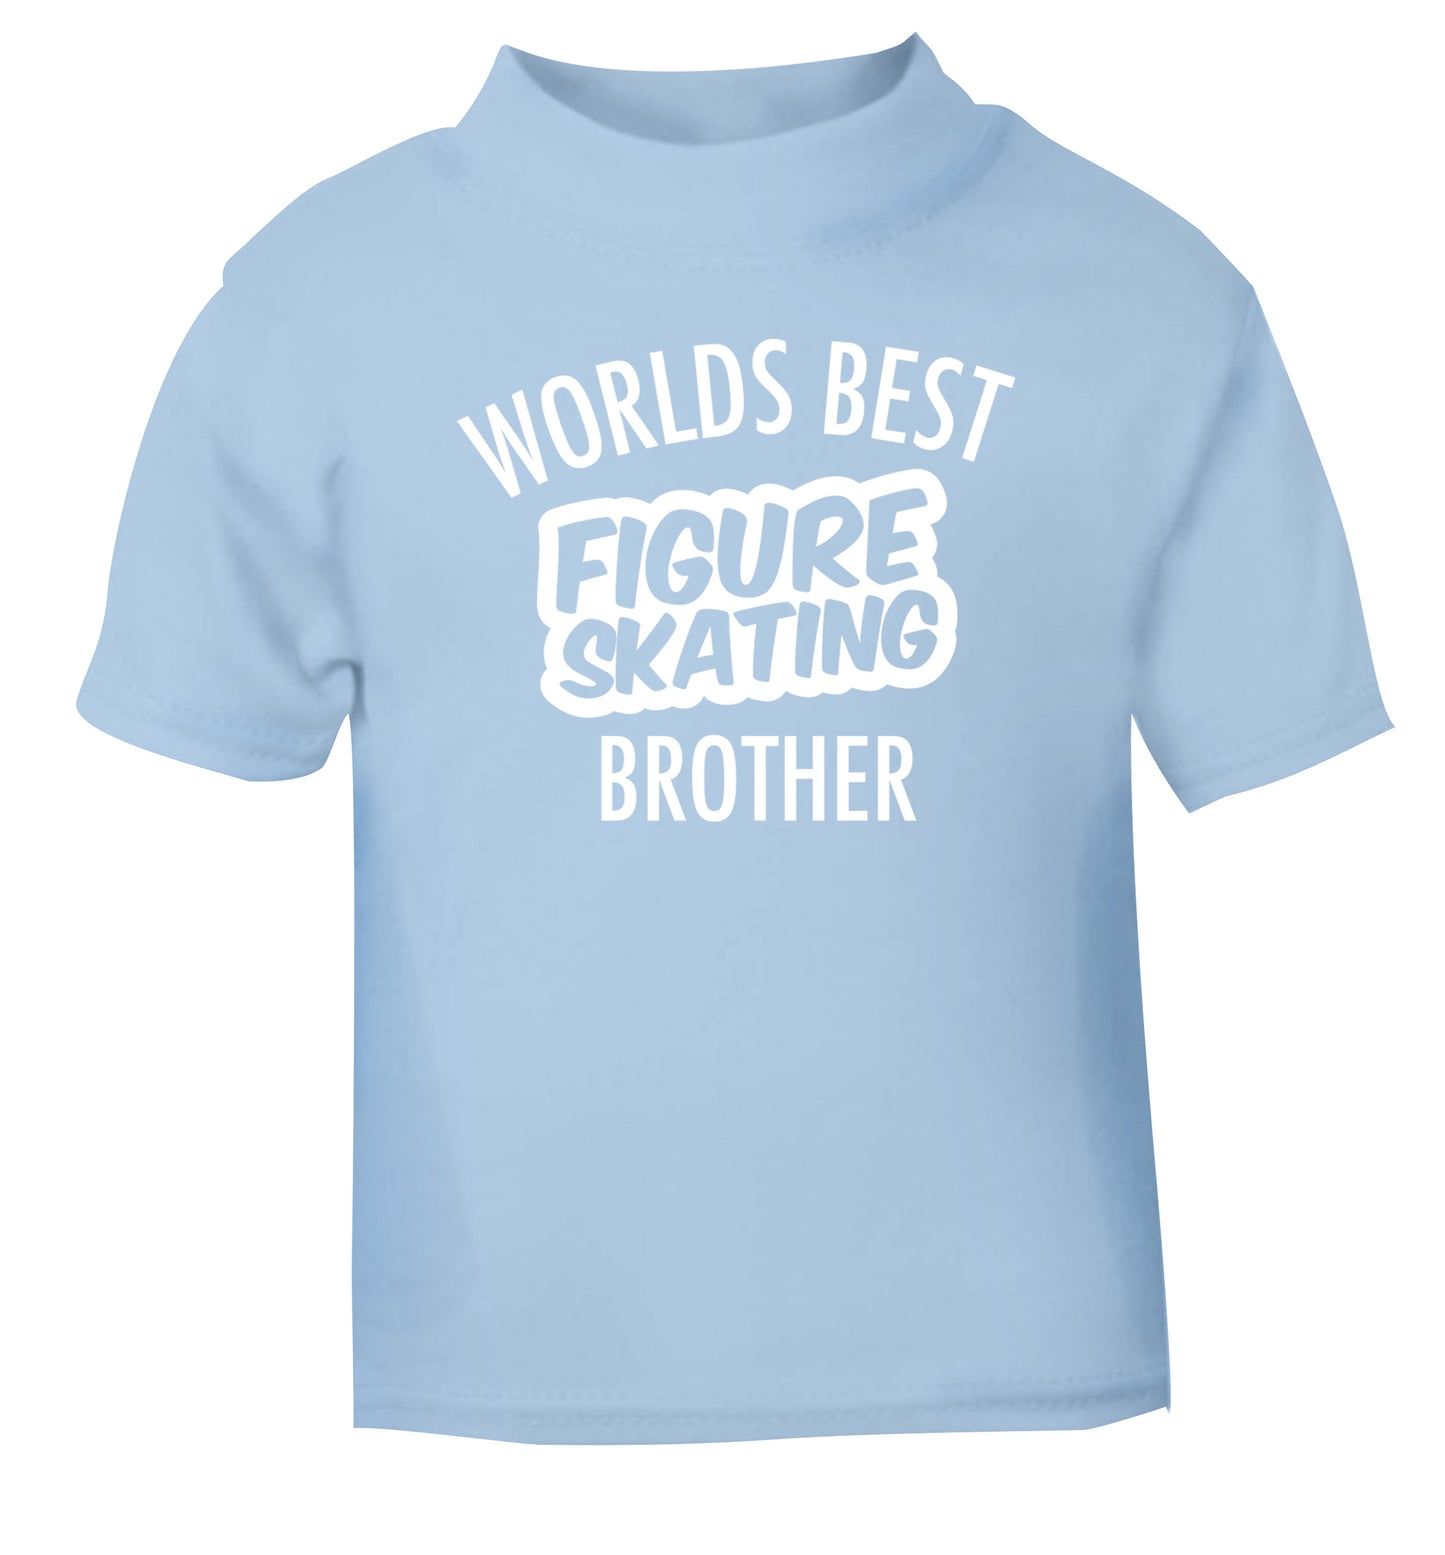 Worlds best figure skating brother light blue Baby Toddler Tshirt 2 Years